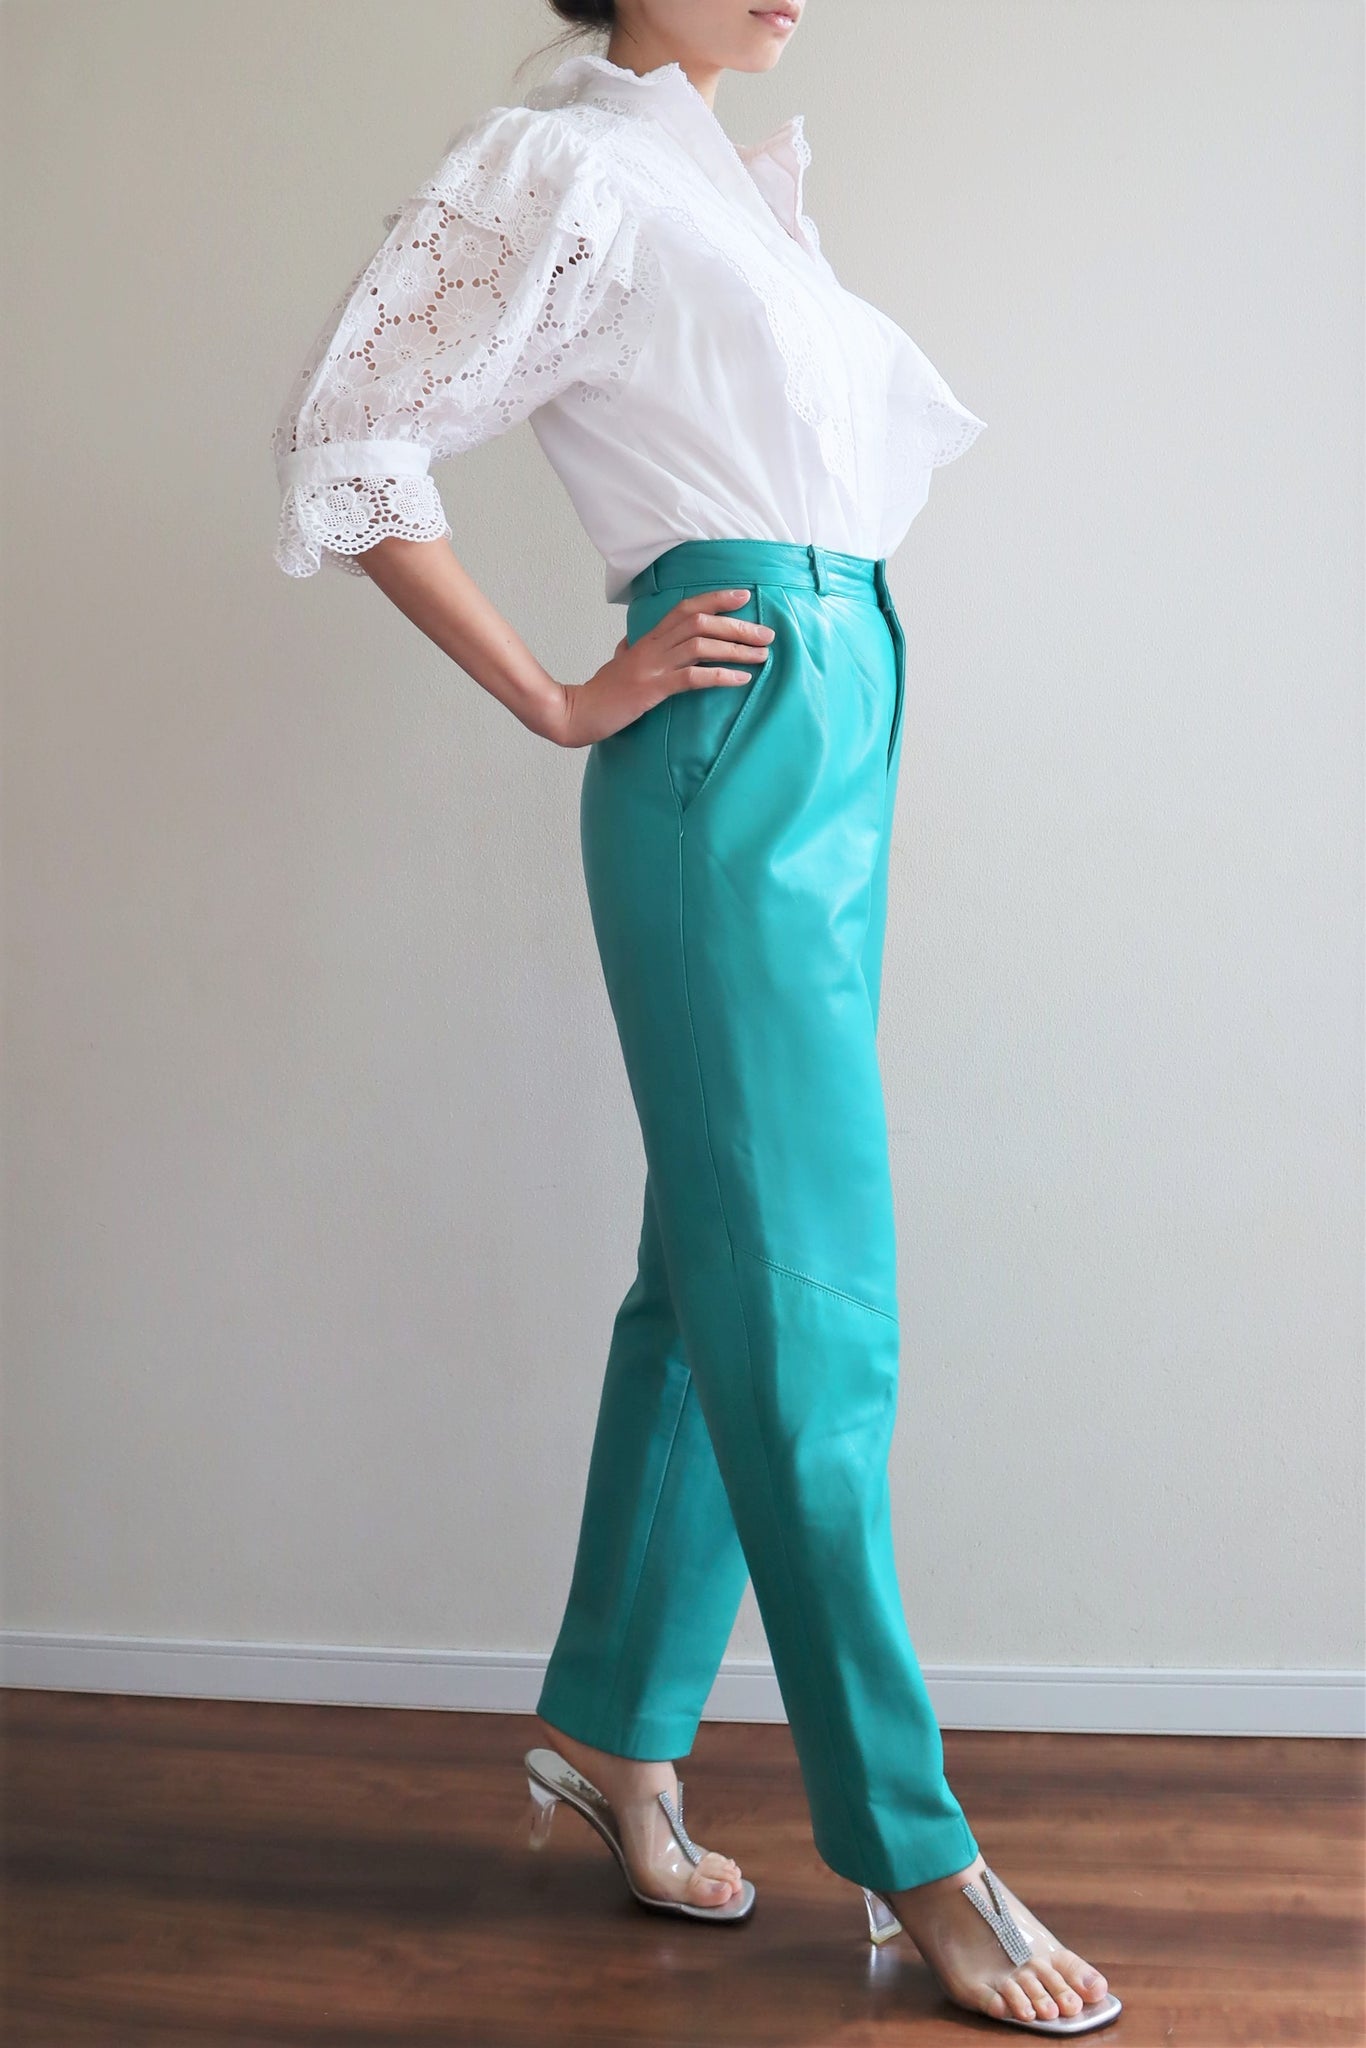 90s Emerald Green Bright Leather Pants